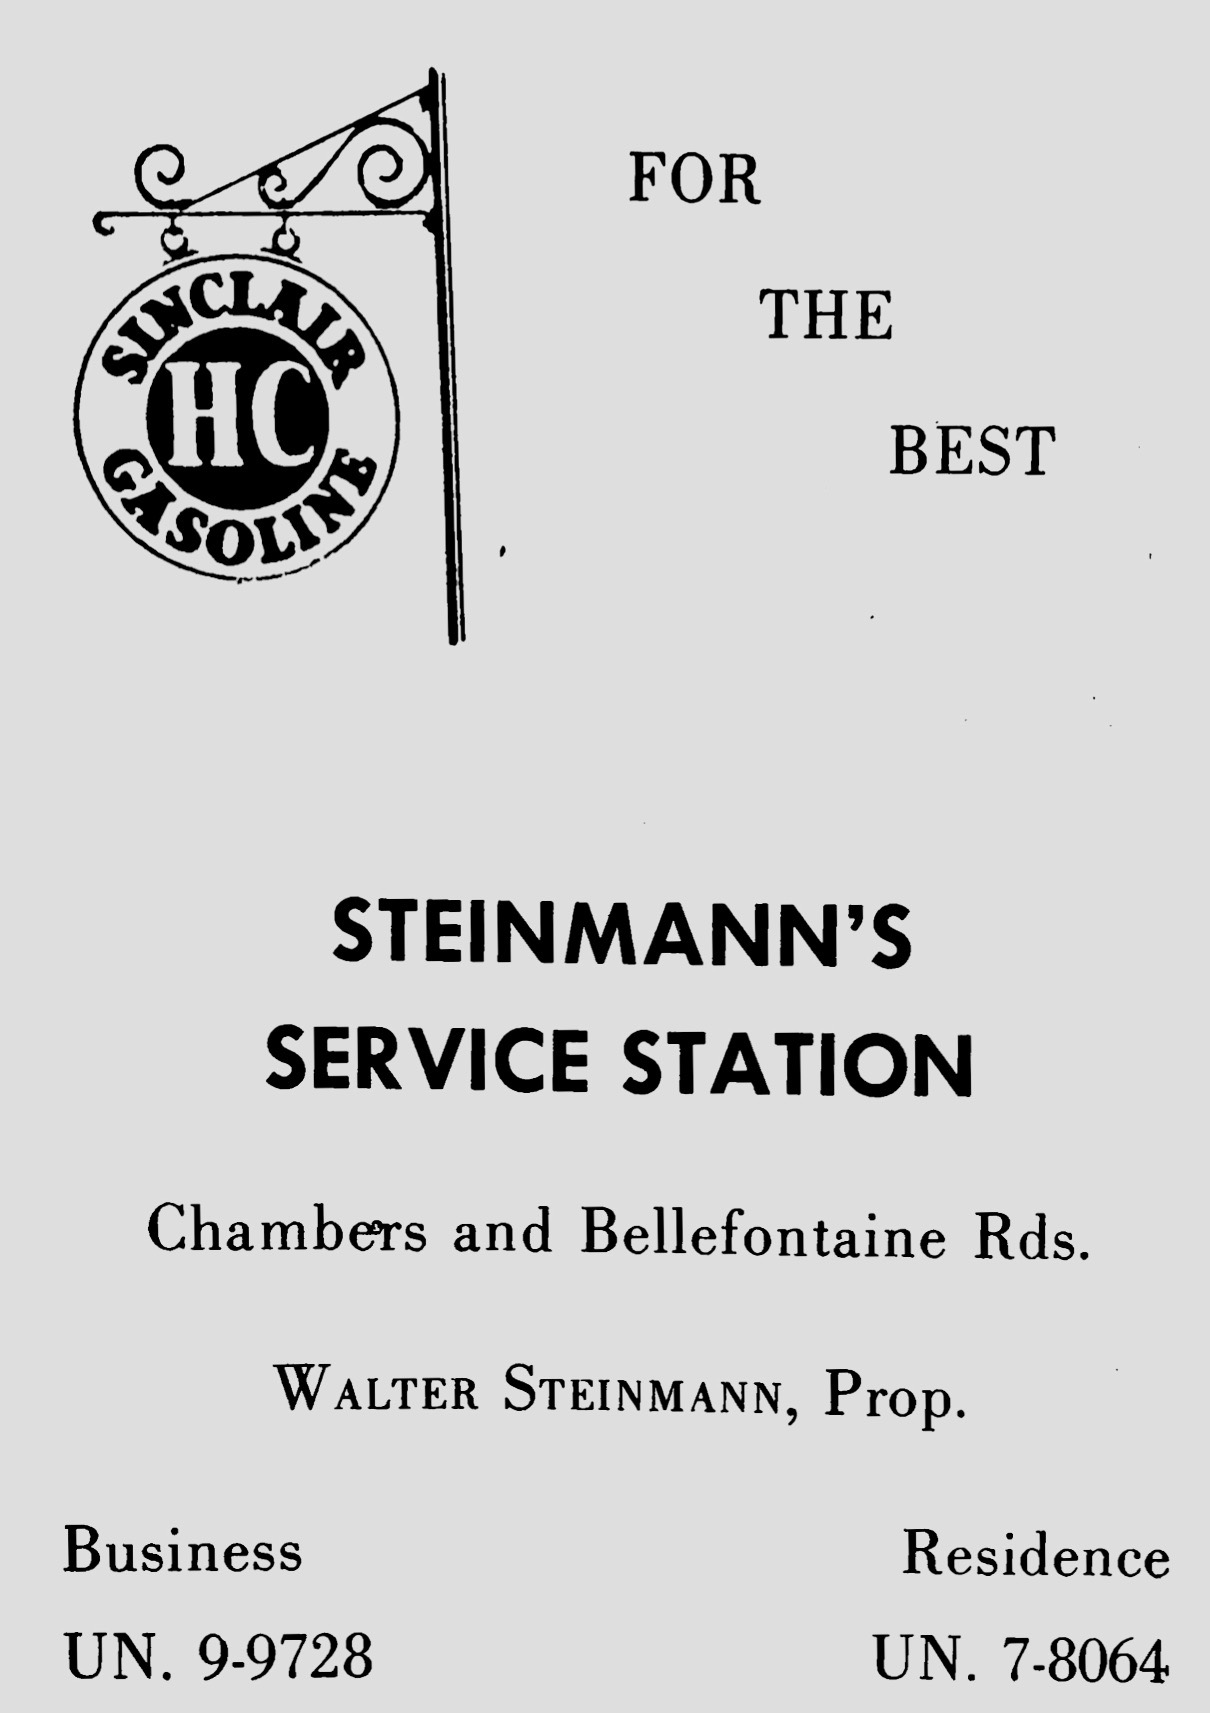 ECHOES 1957 AD FOR STEINMANN'S SERVICE STATION. When the Class of 1969 was at RGHS, Mike Hunter's uncle owned the station and called it Hunter Sinclair. ECHOES 1957 